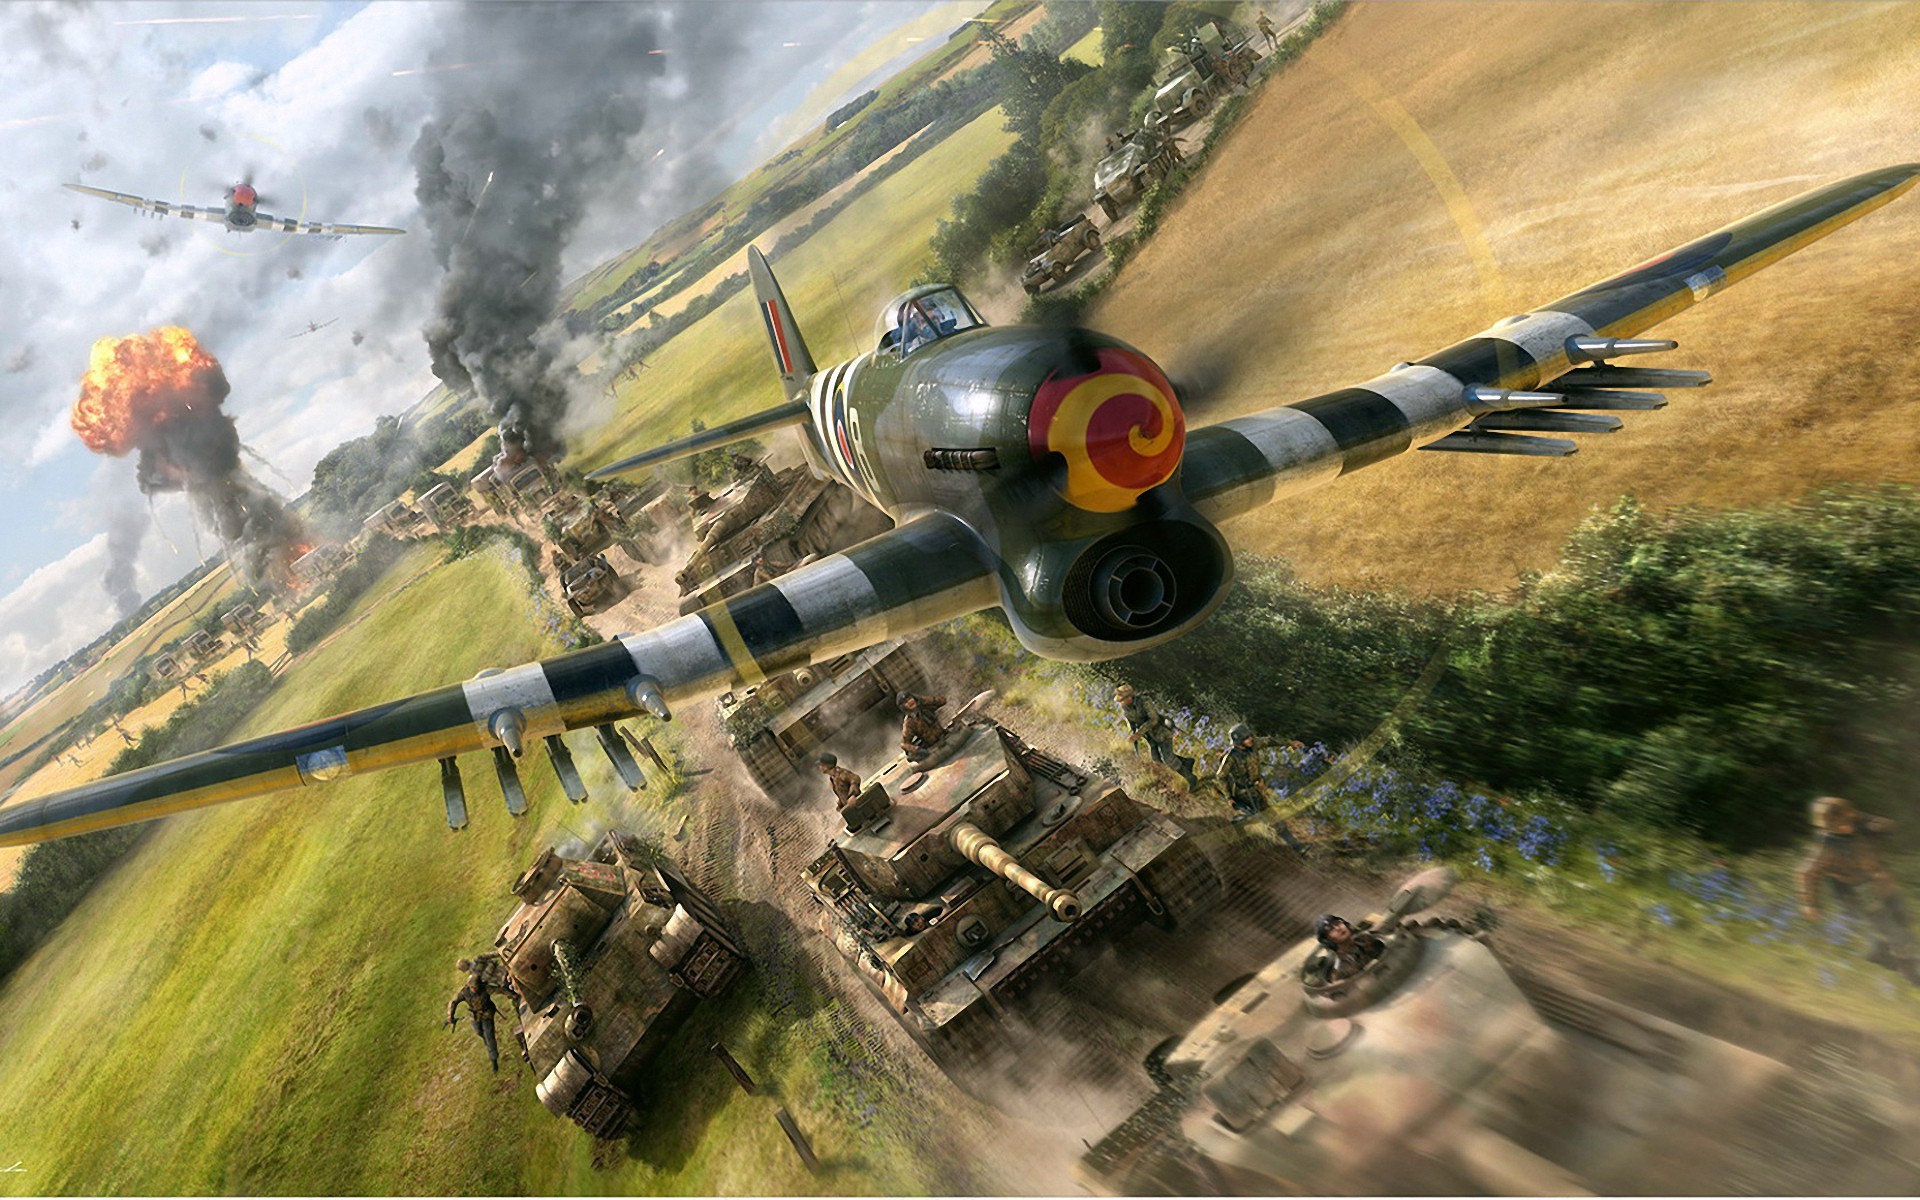  planes and tanks wallpapers and images   wallpapers pictures photos 1920x1200